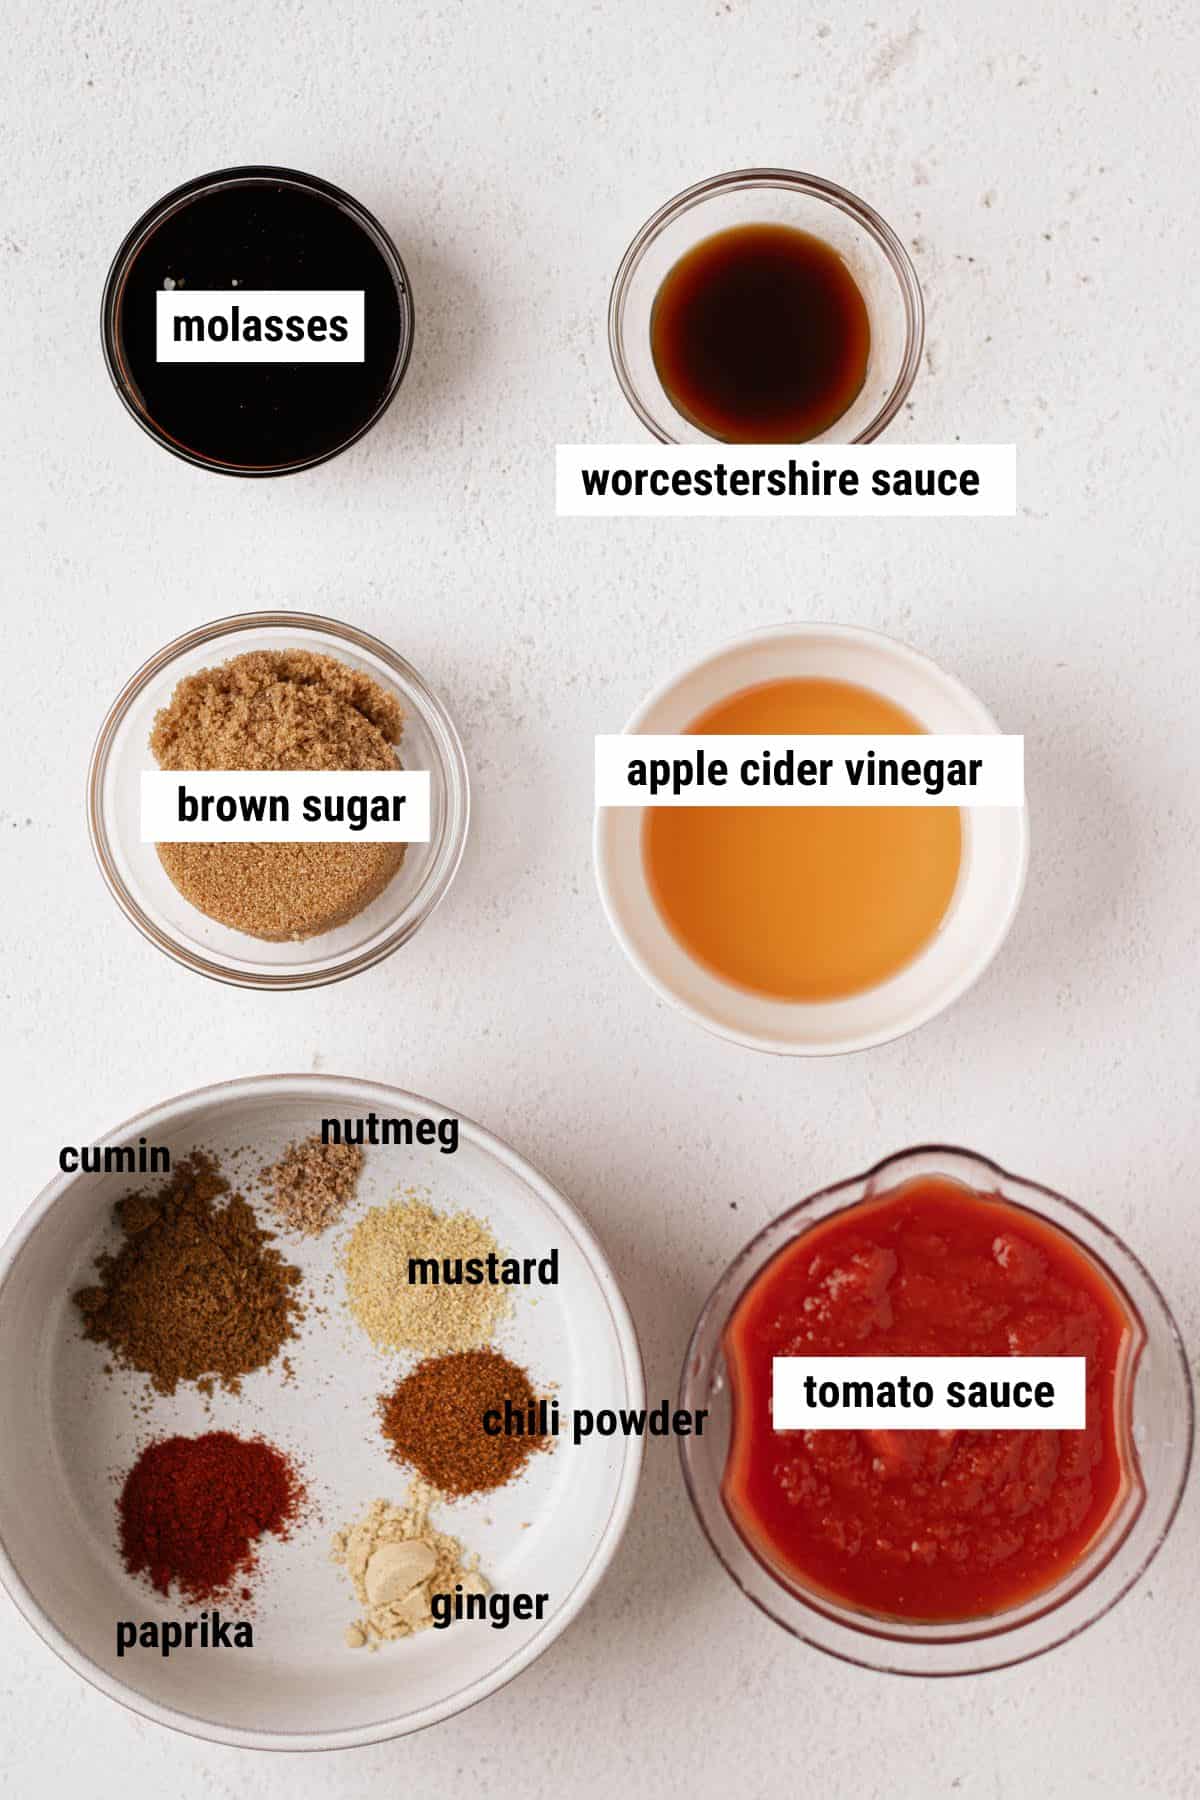 Molasses, worcestershire sauce, brown sugar, apple cider vinegar, tomato sauce and spices displayed in a visual picture.